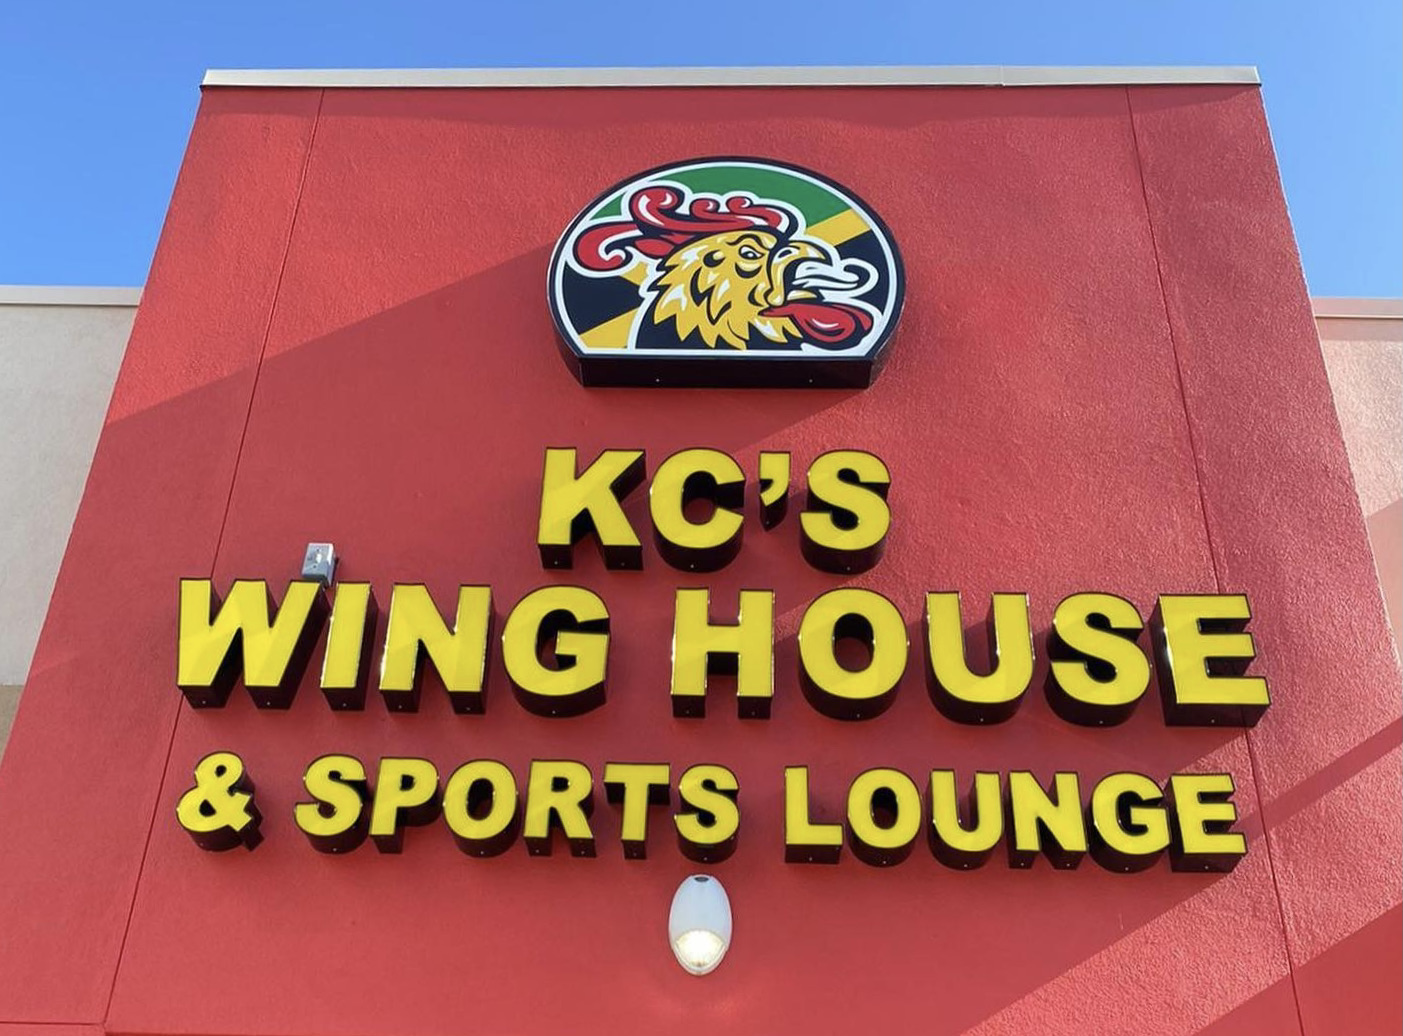 New Joint in North Lauderdale Has the "Best Wings in Town”